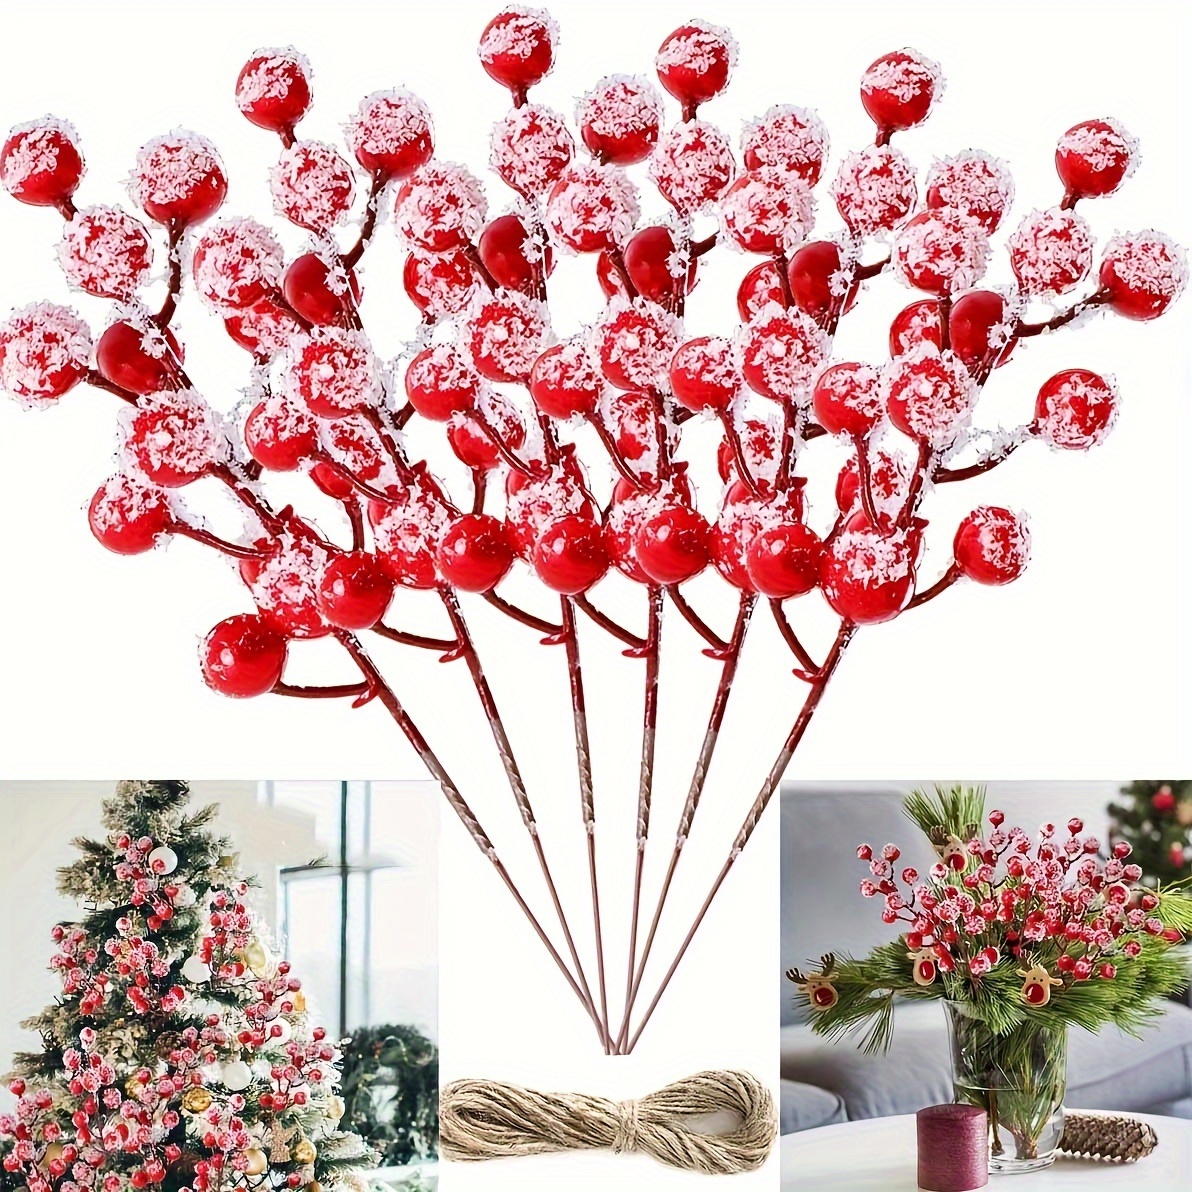  DILATATA Plastic Artificial Snowberry Stems Holly Christmas  Berries for Festival Holiday Crafts and Home Decor, 11 Inches Winter  Berries Floral Christmas Tree Decorations : Arts, Crafts & Sewing